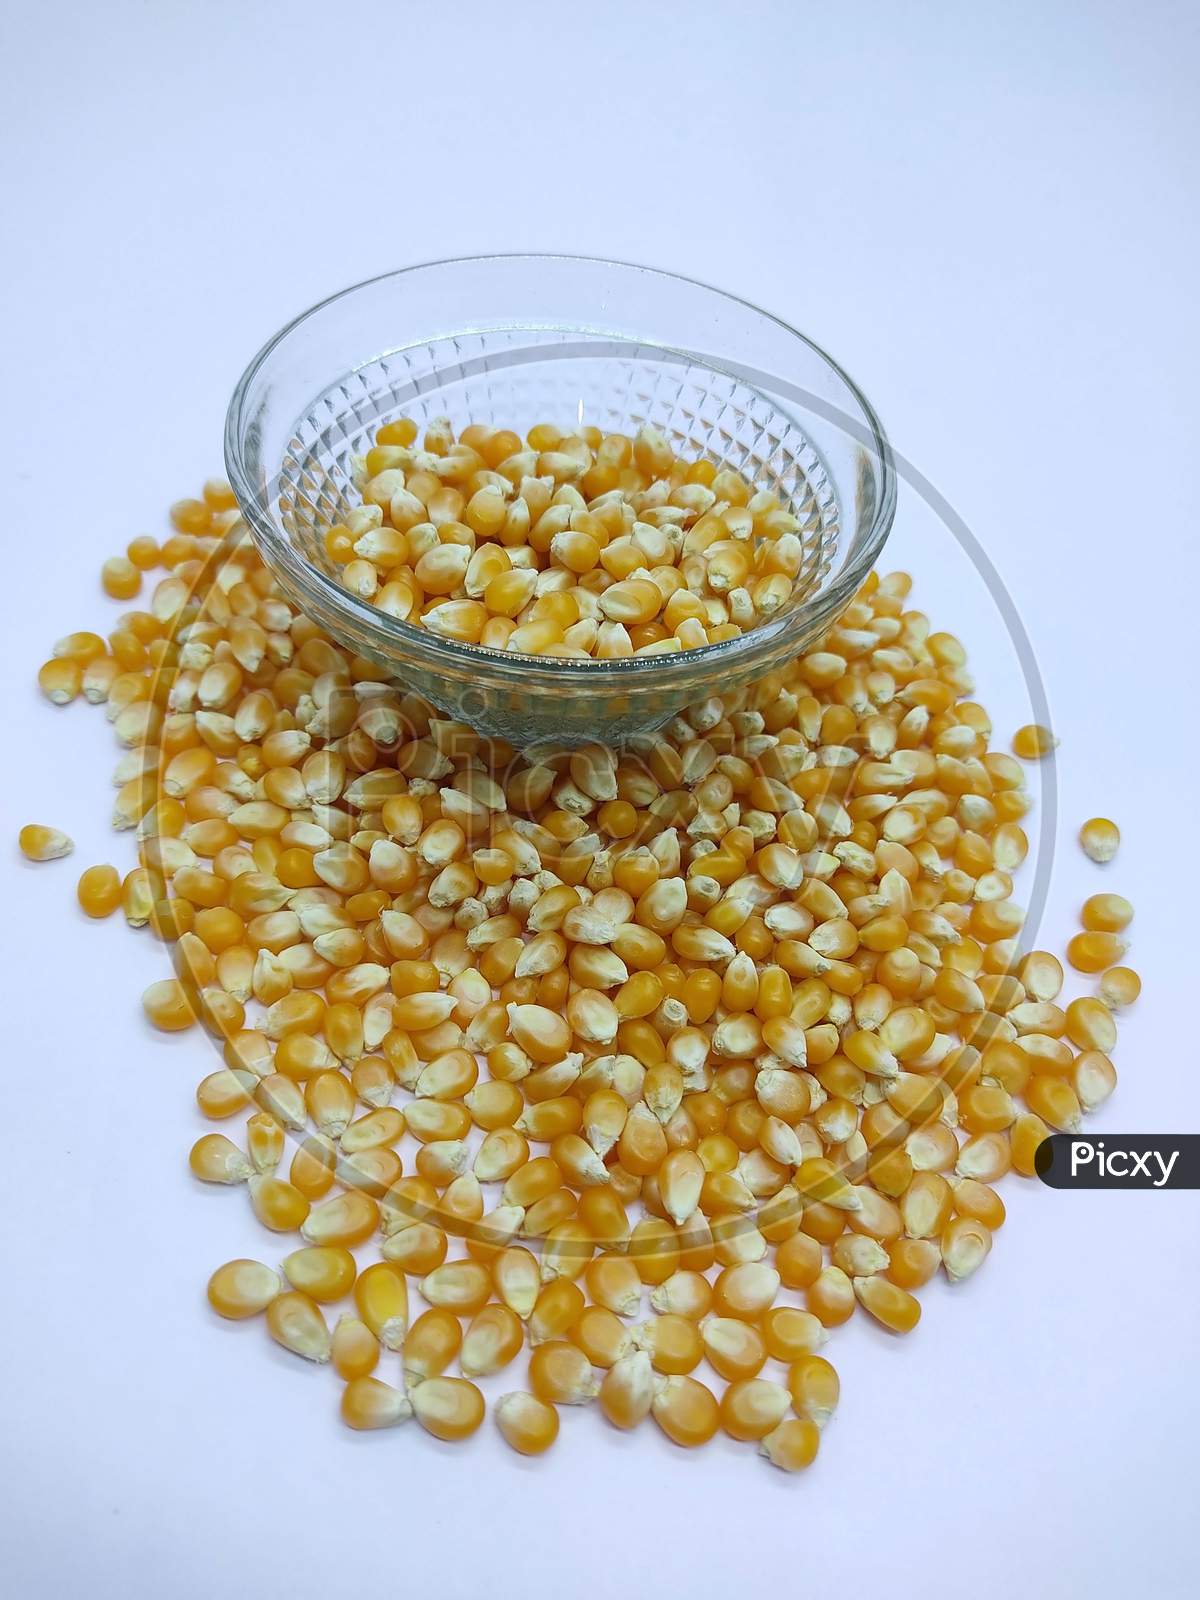 Corns Seeds, Corn Kernels, Yellow Dry Corn Grains Isolated On White Background.